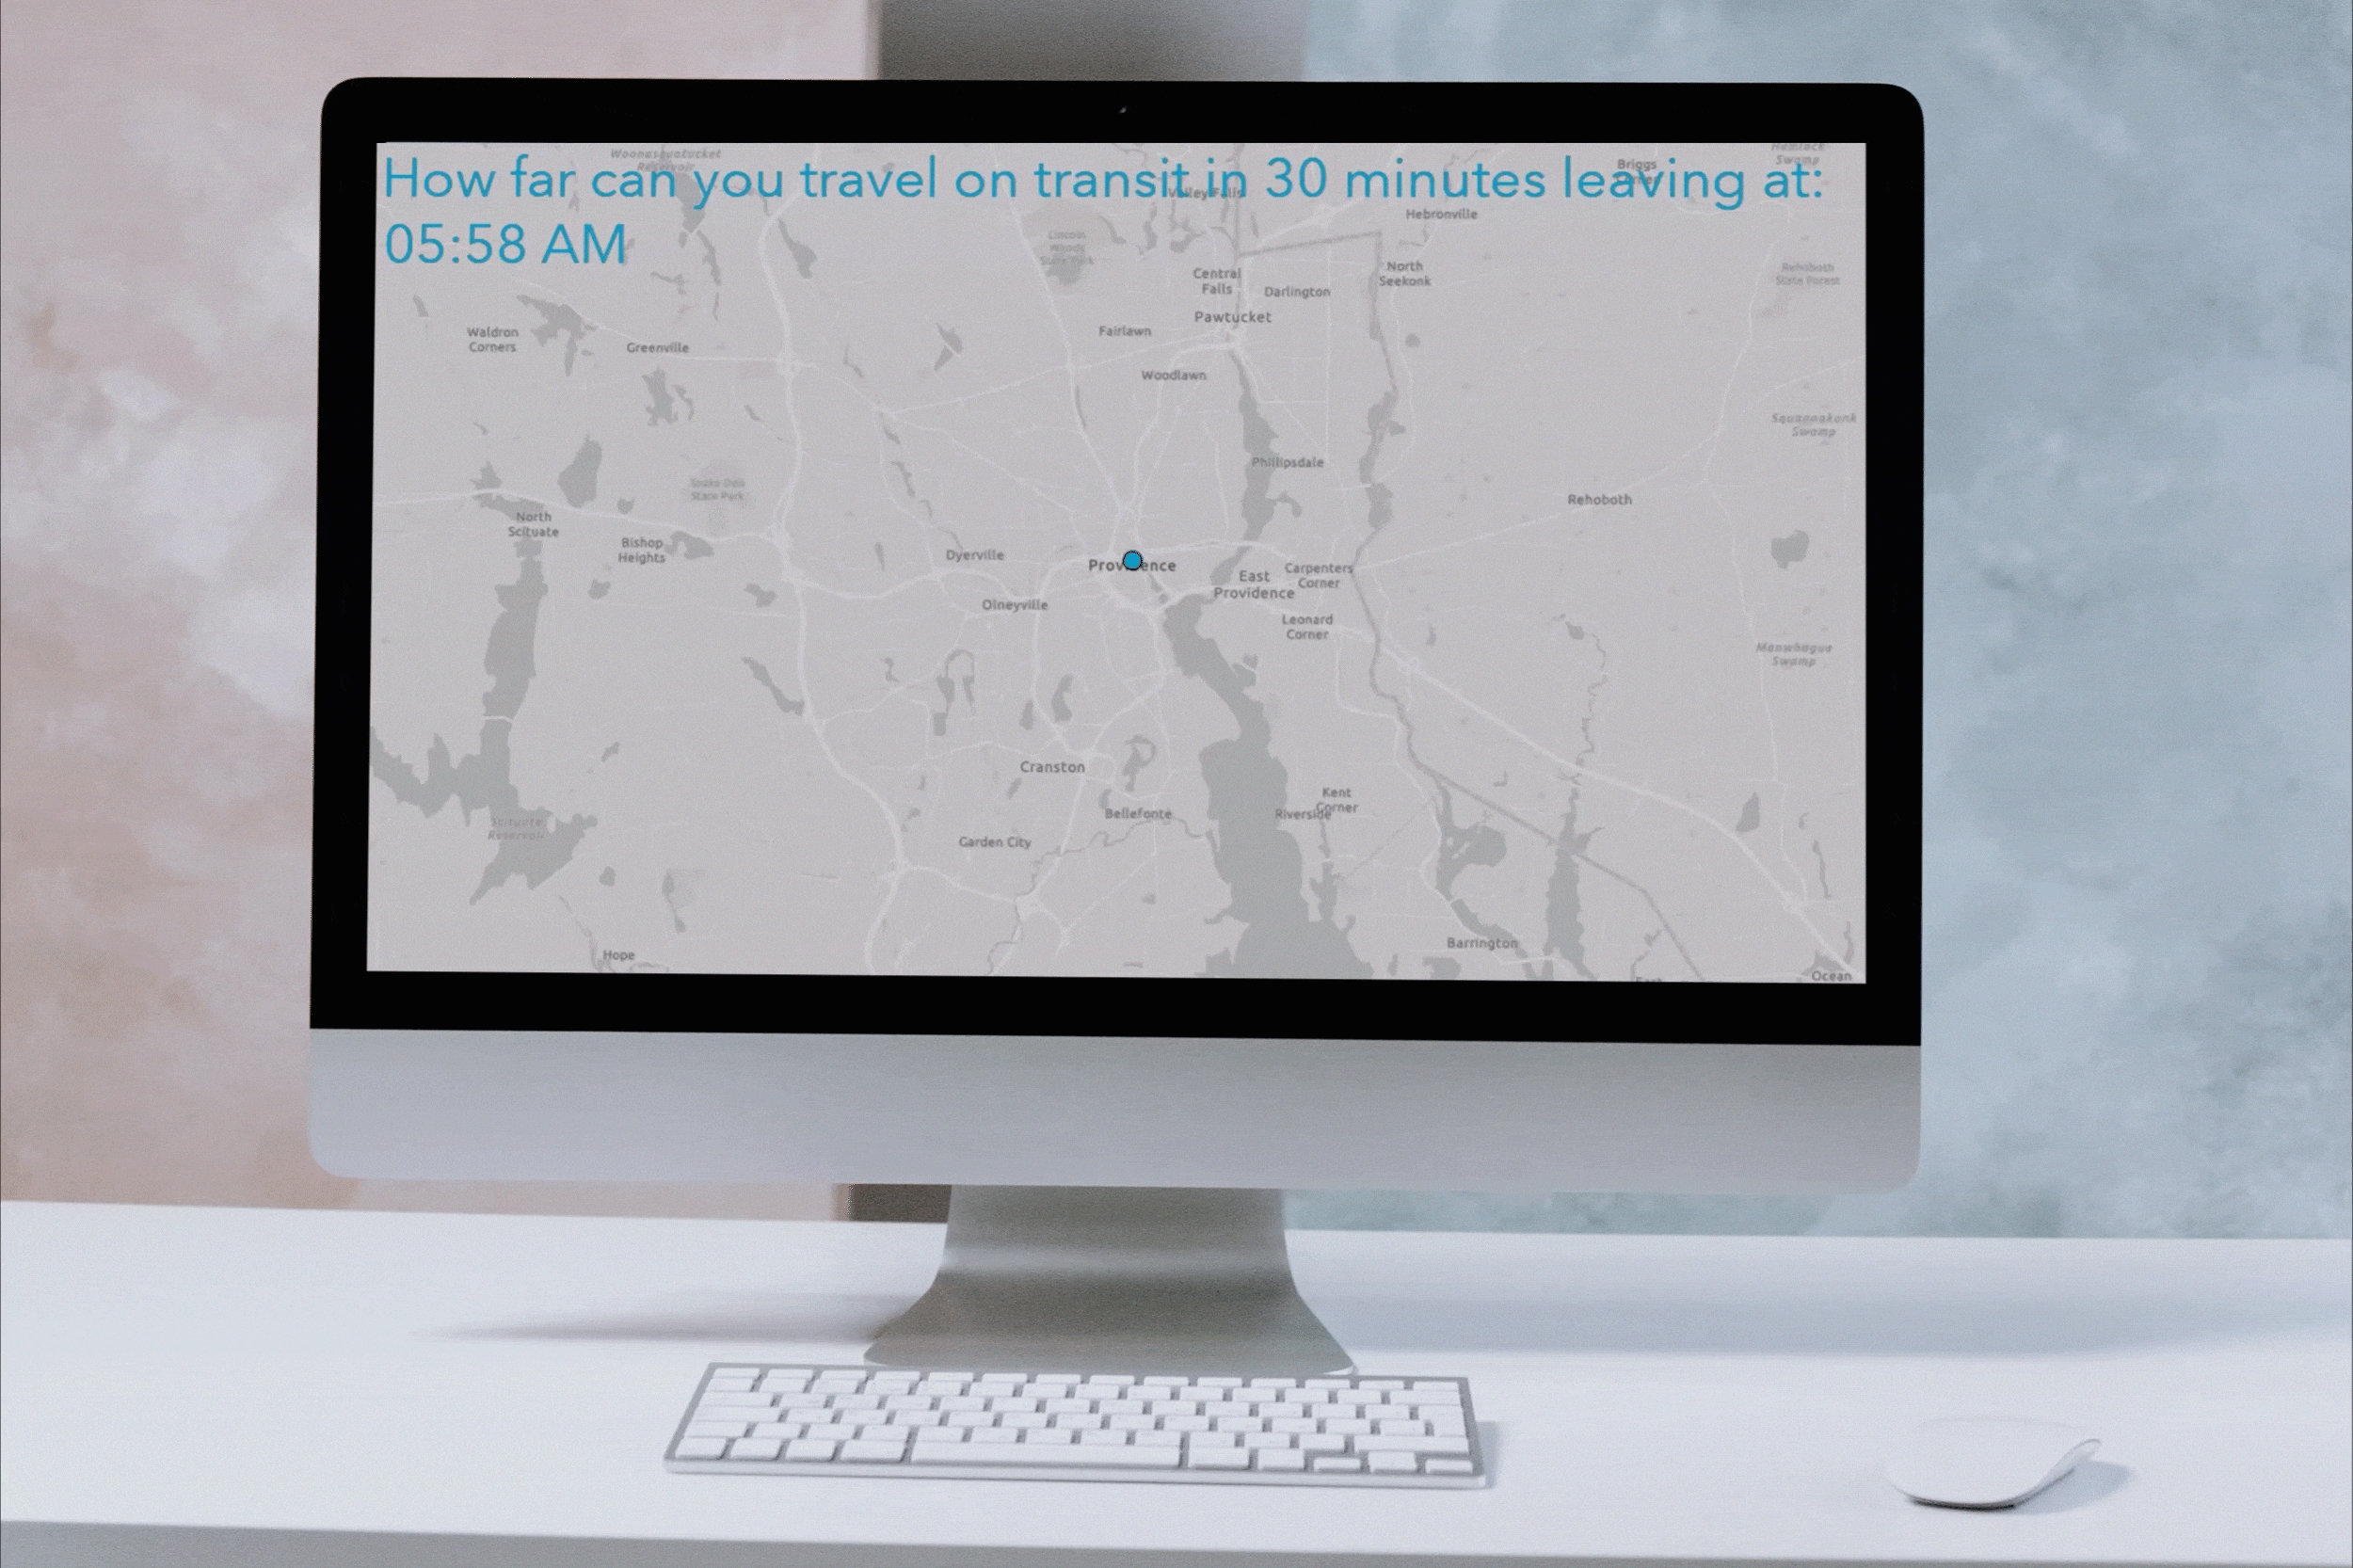 Digital animation of a map showing how far you can travel on transit leaving at various times.